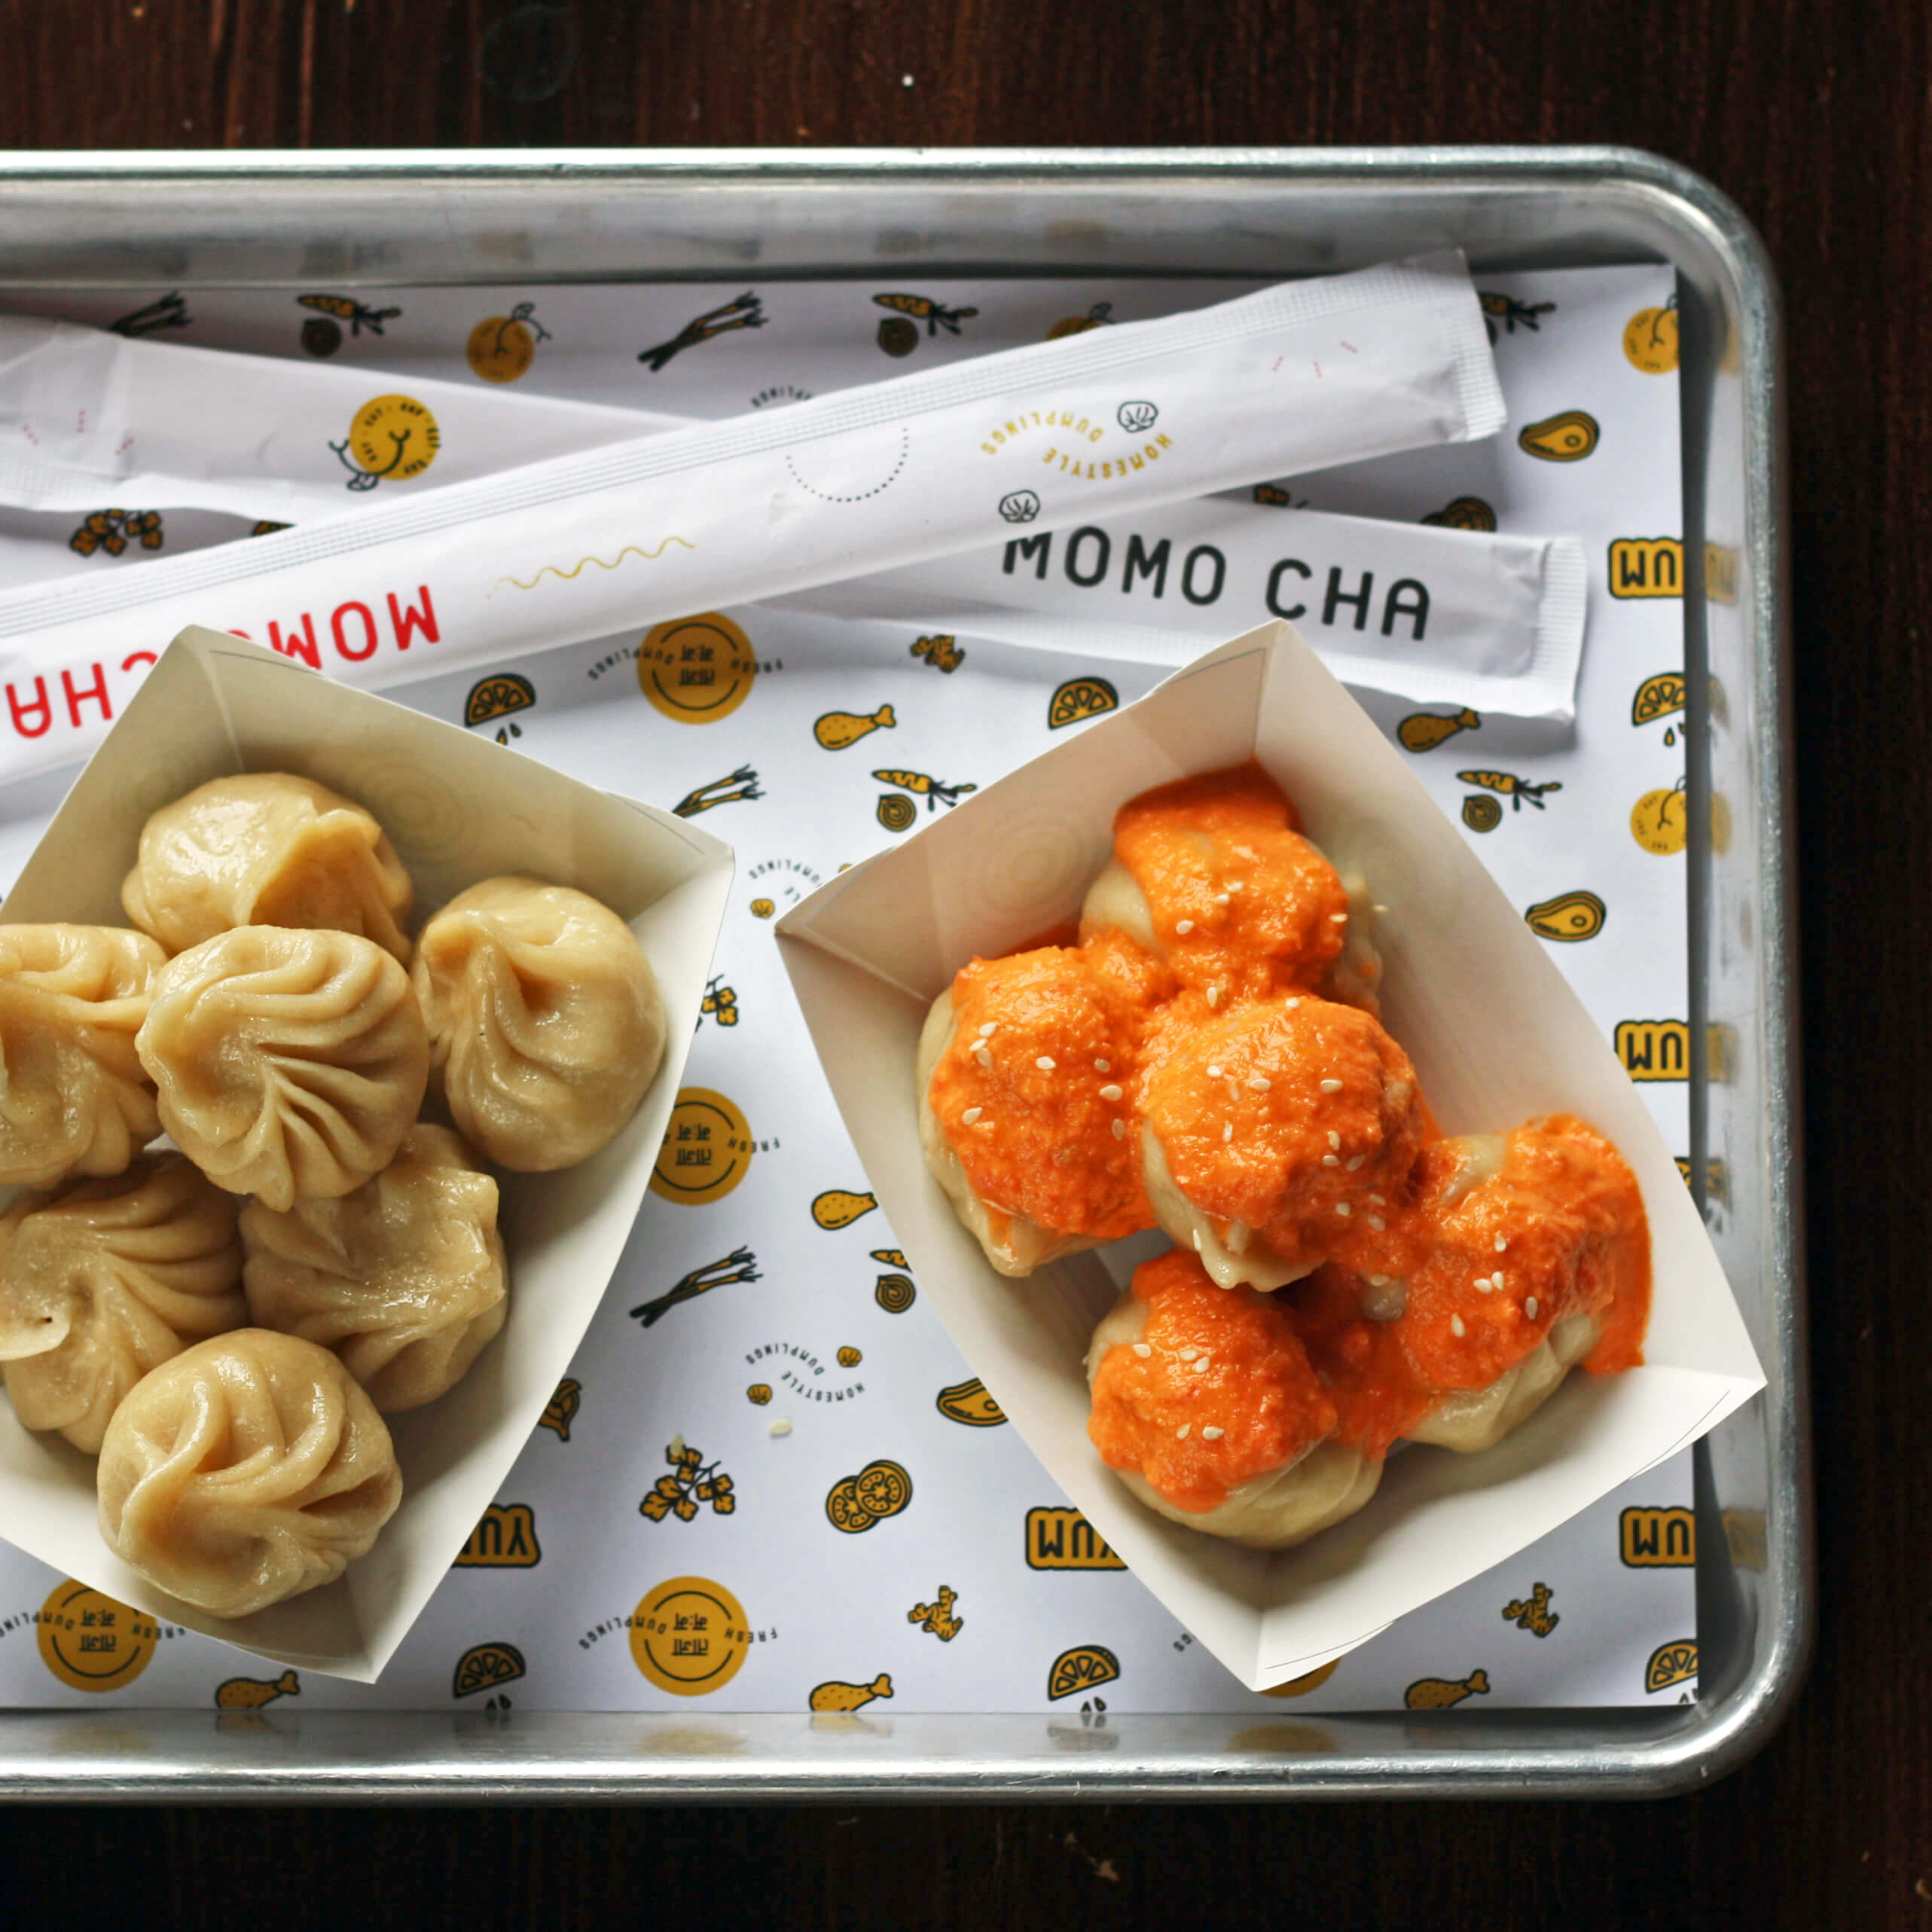 Two boats of steamed momos on a metal tray. One set of momos is topped with a bright orange chutney.